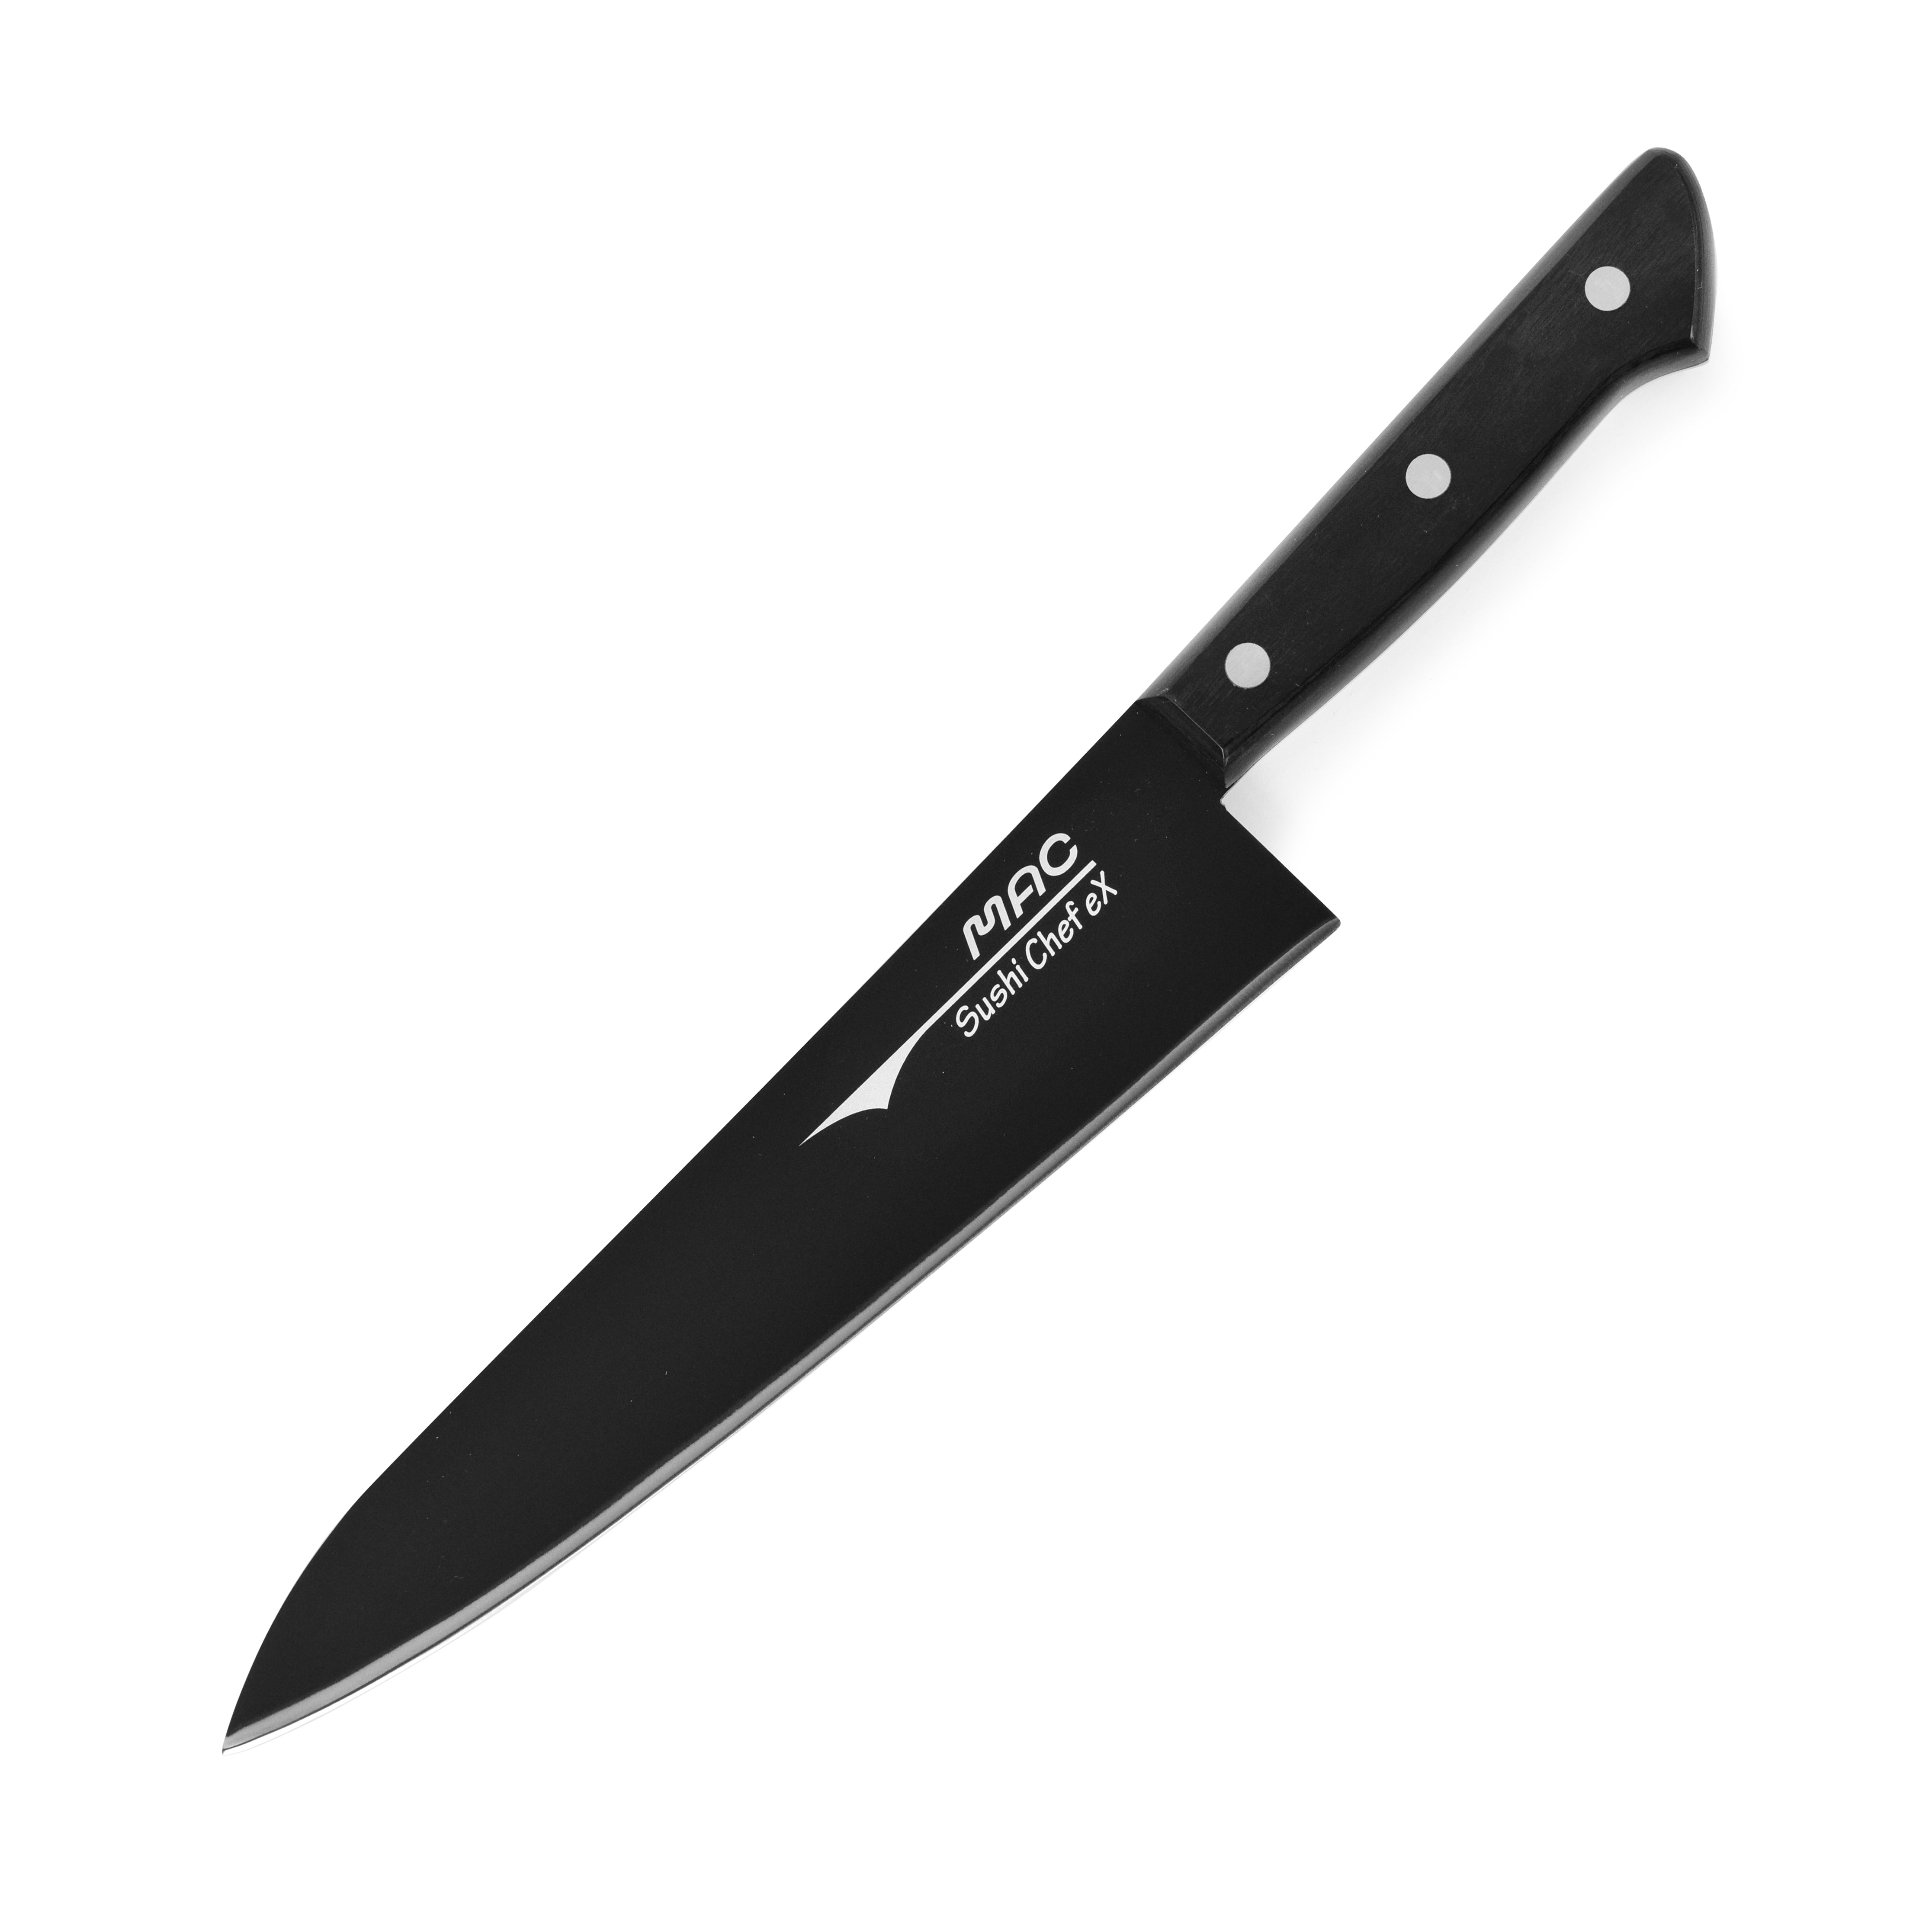 8-Inch Nonstick Carbon Steel Sushi Knife with Sheath, Black